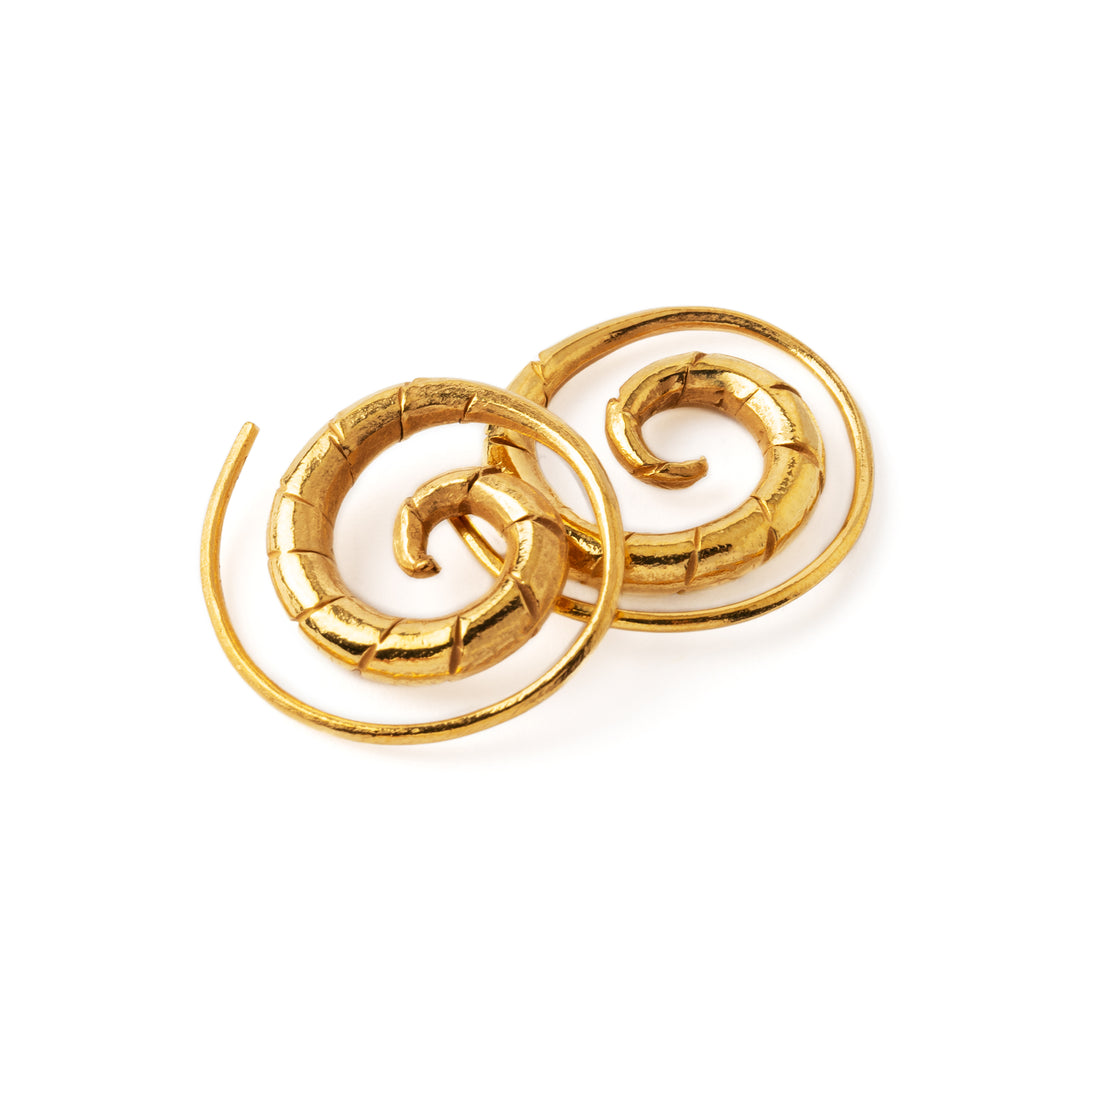 Gold Spiral Swirl Earrings front and side view